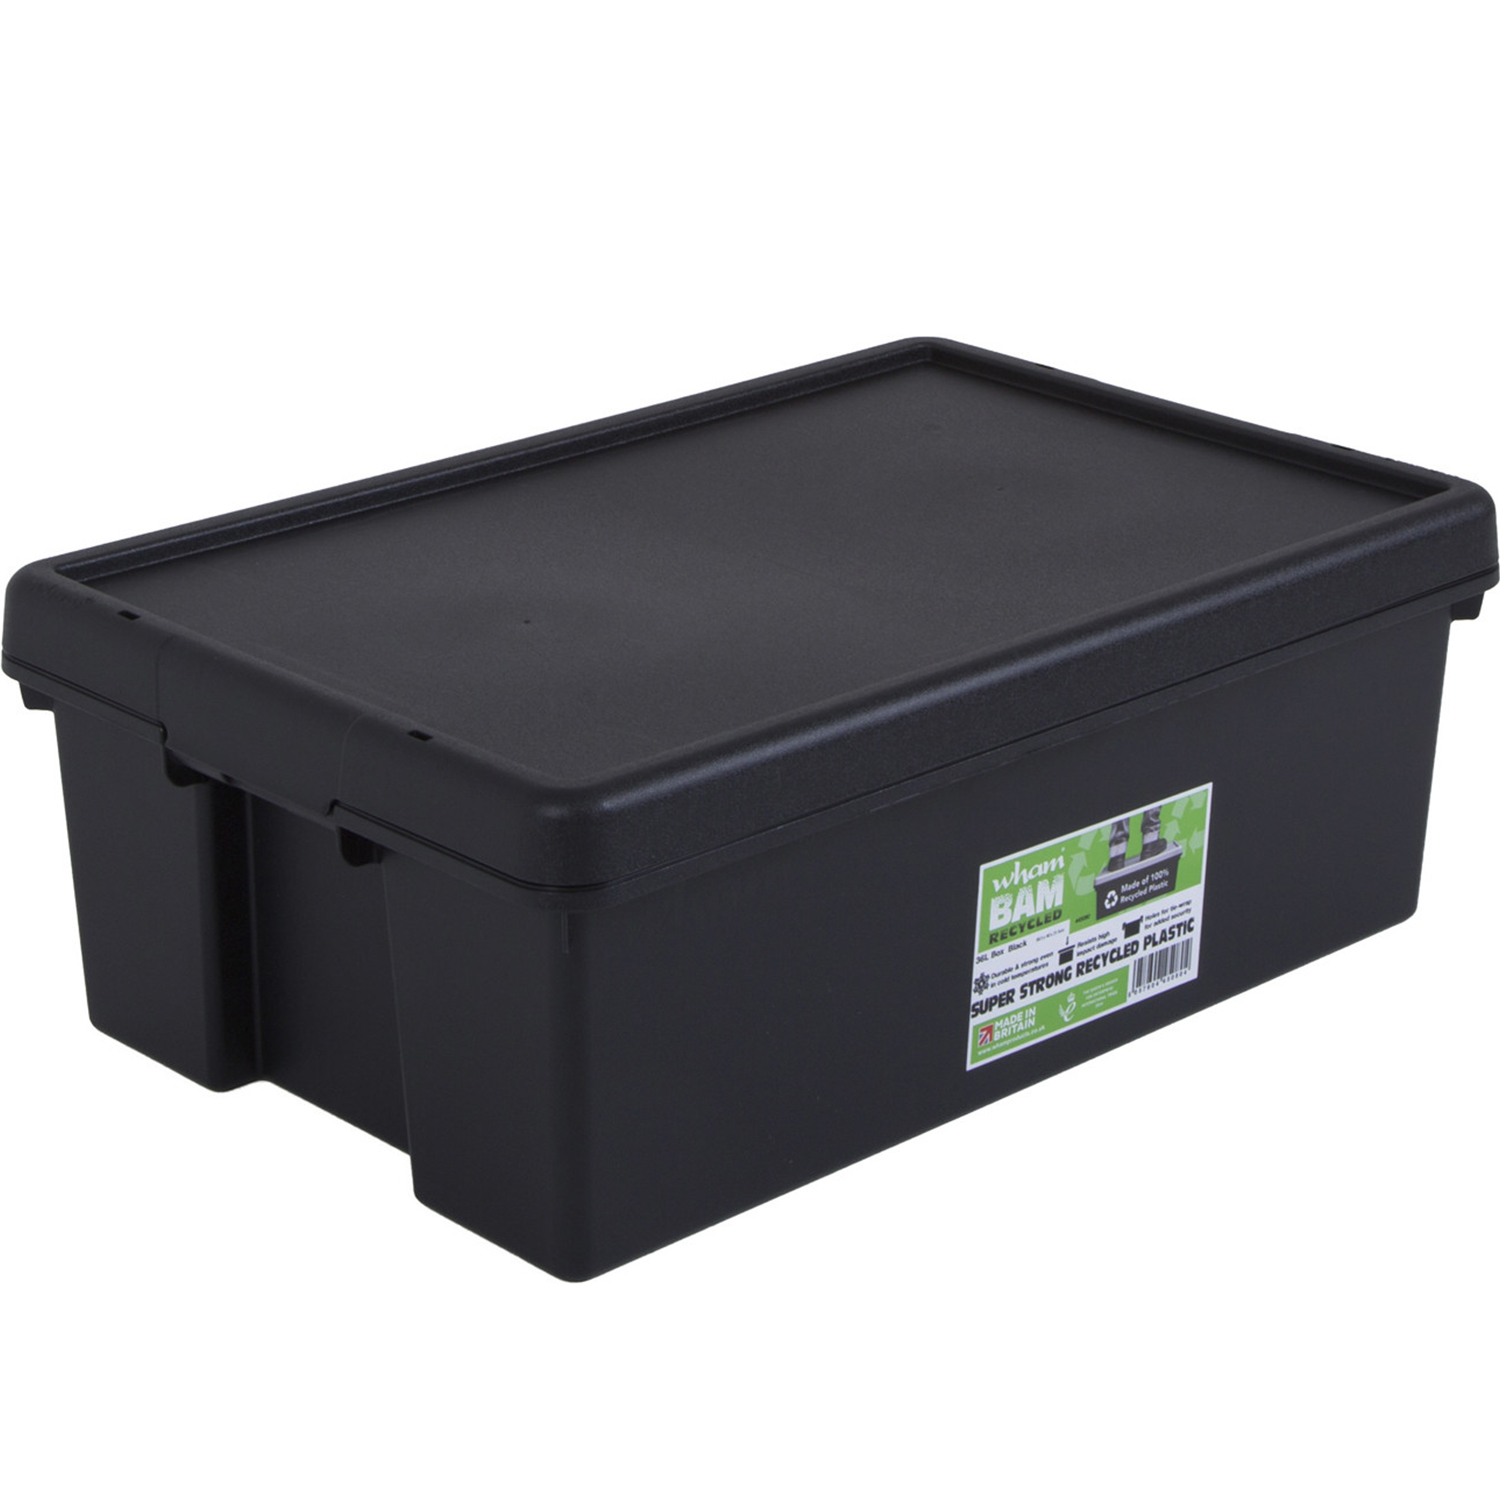 Wham Bam 36L Recycled Black Storage Box with Lid Image